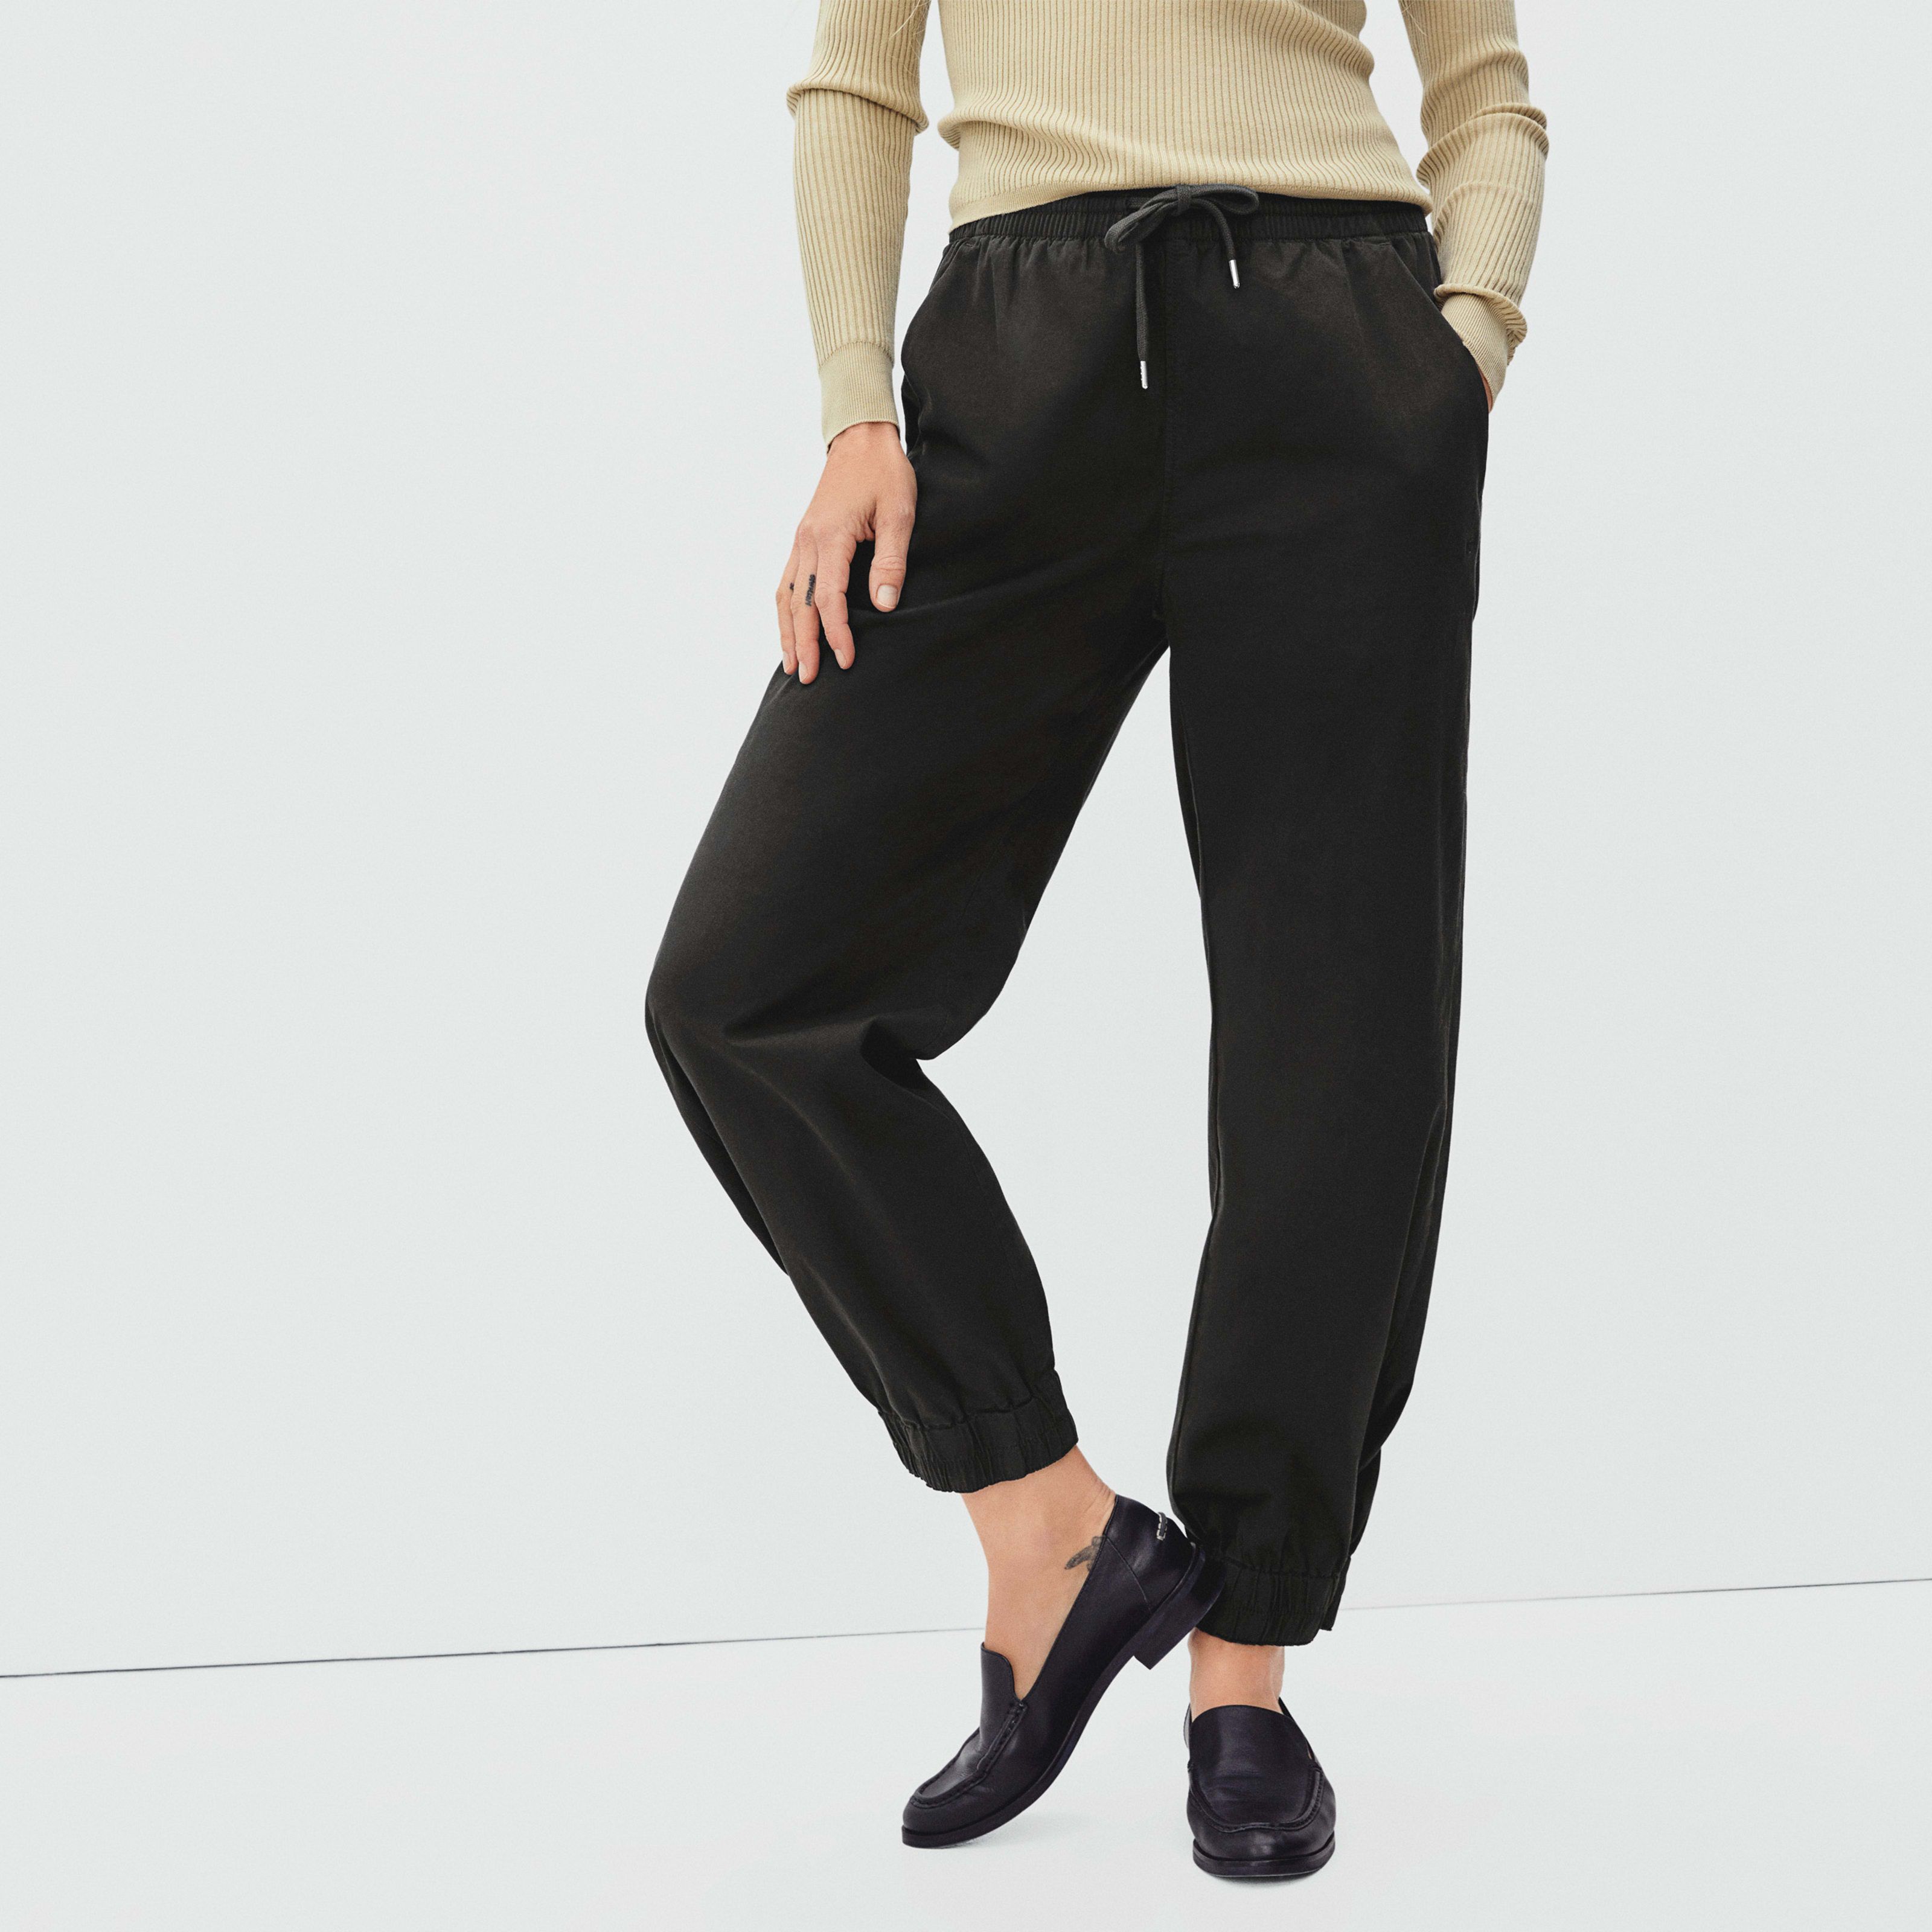 Women's Easy Jogger by Everlane in Black, Size M | Everlane